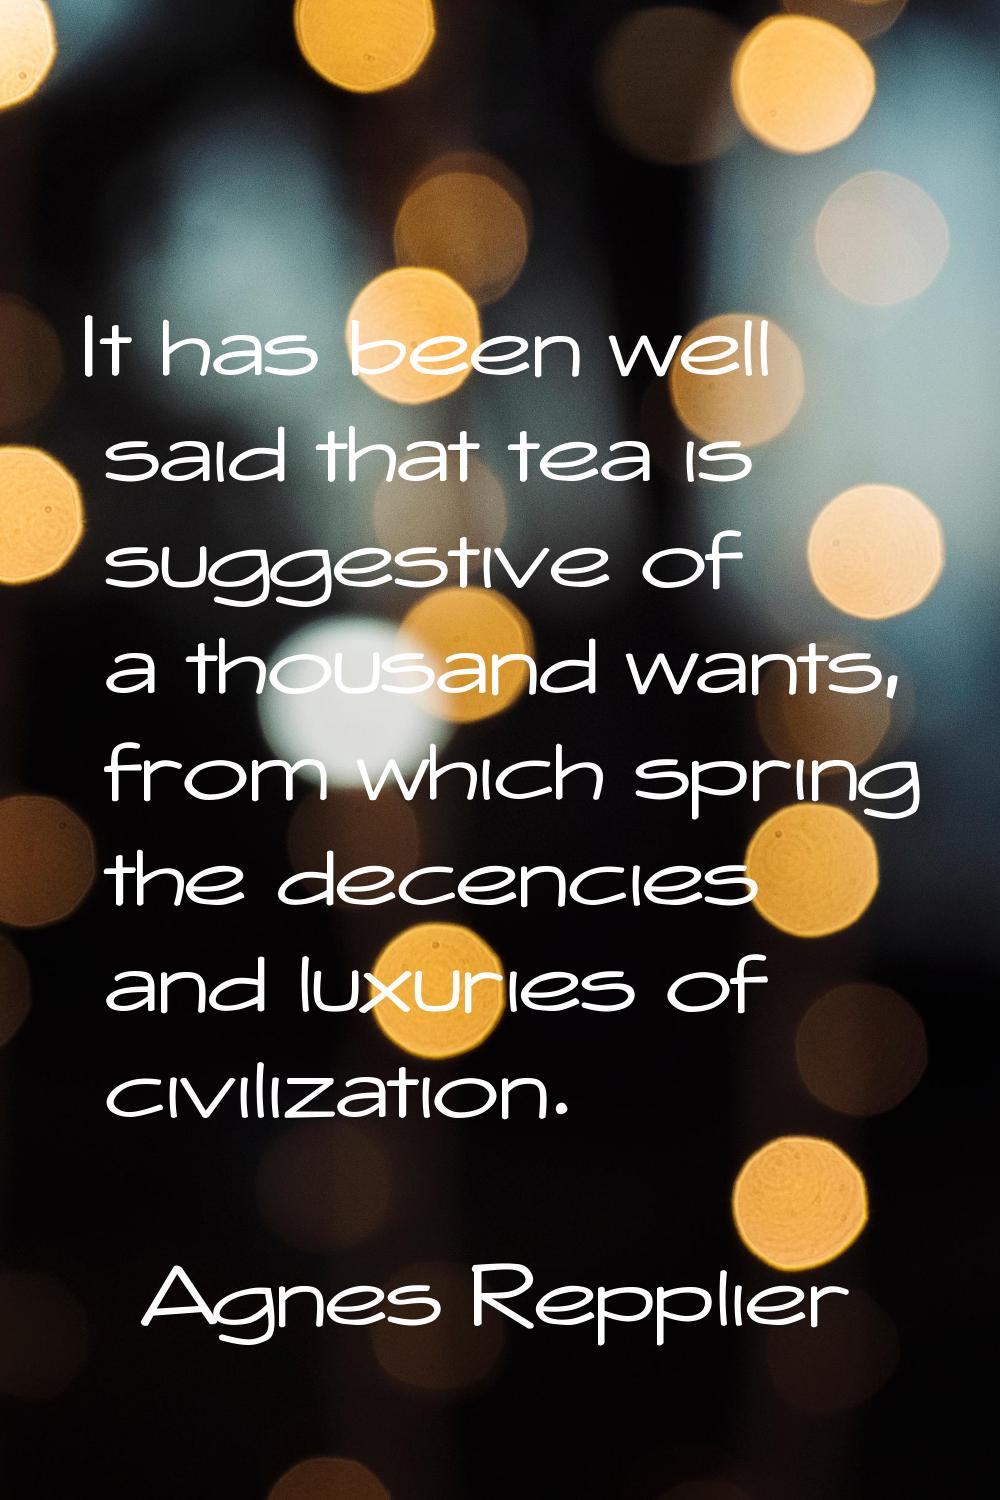 It has been well said that tea is suggestive of a thousand wants, from which spring the decencies a